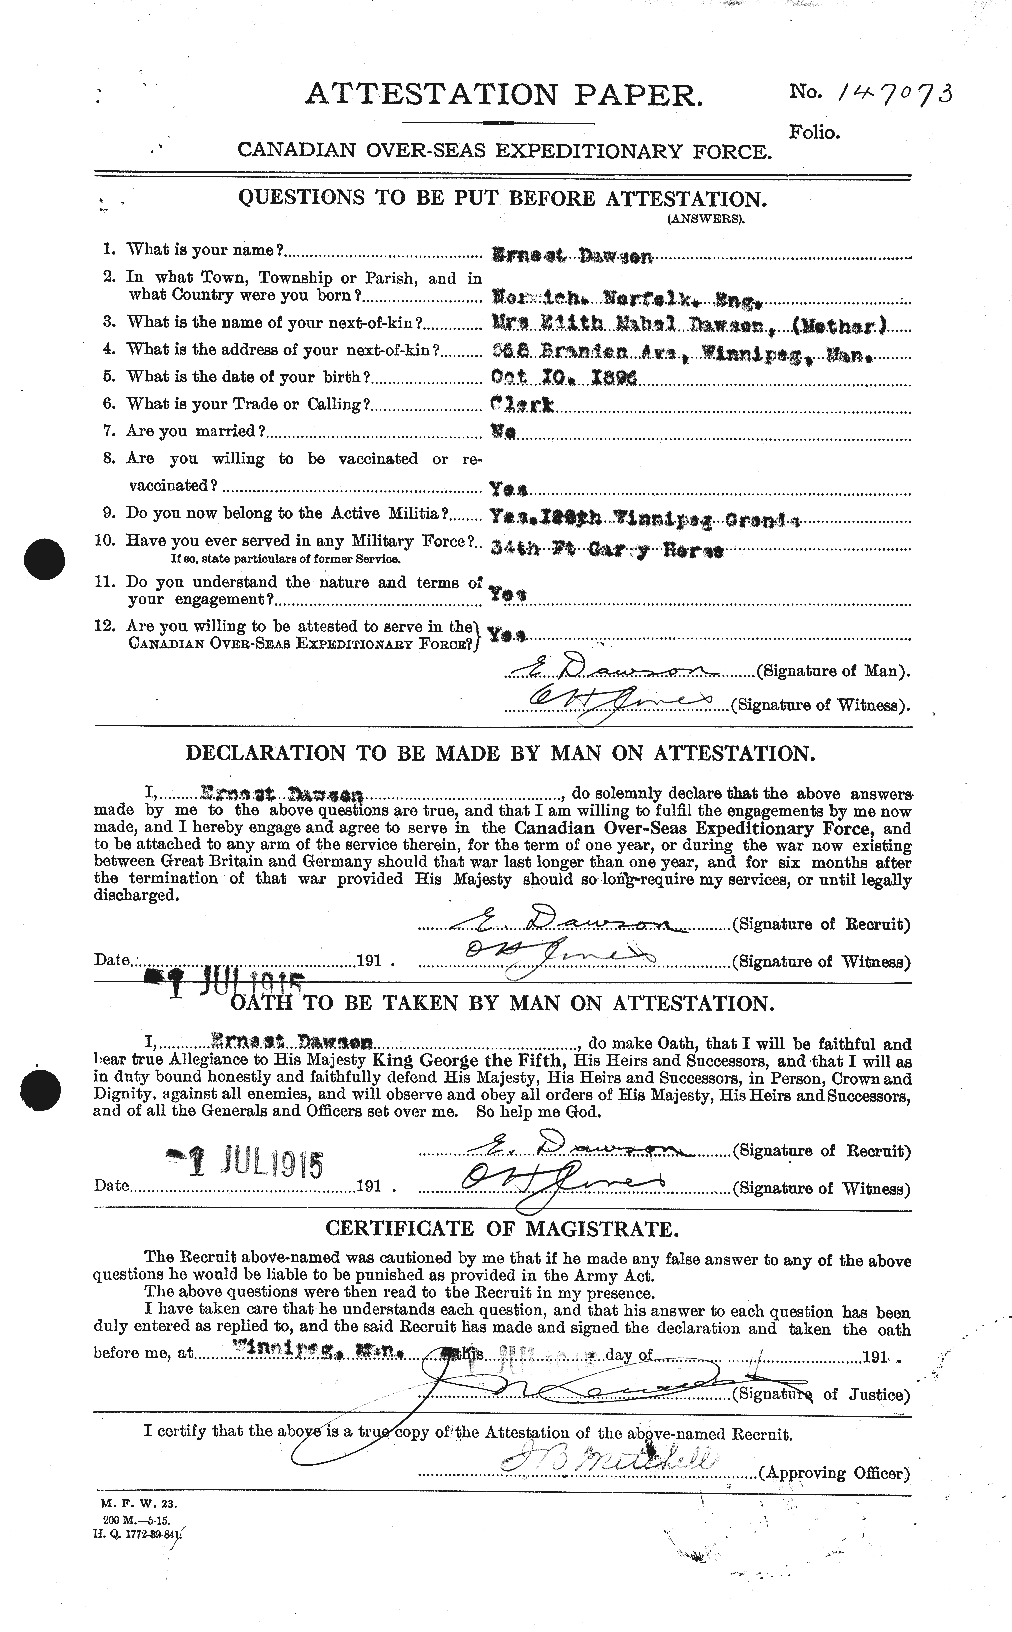 Personnel Records of the First World War - CEF 285135a